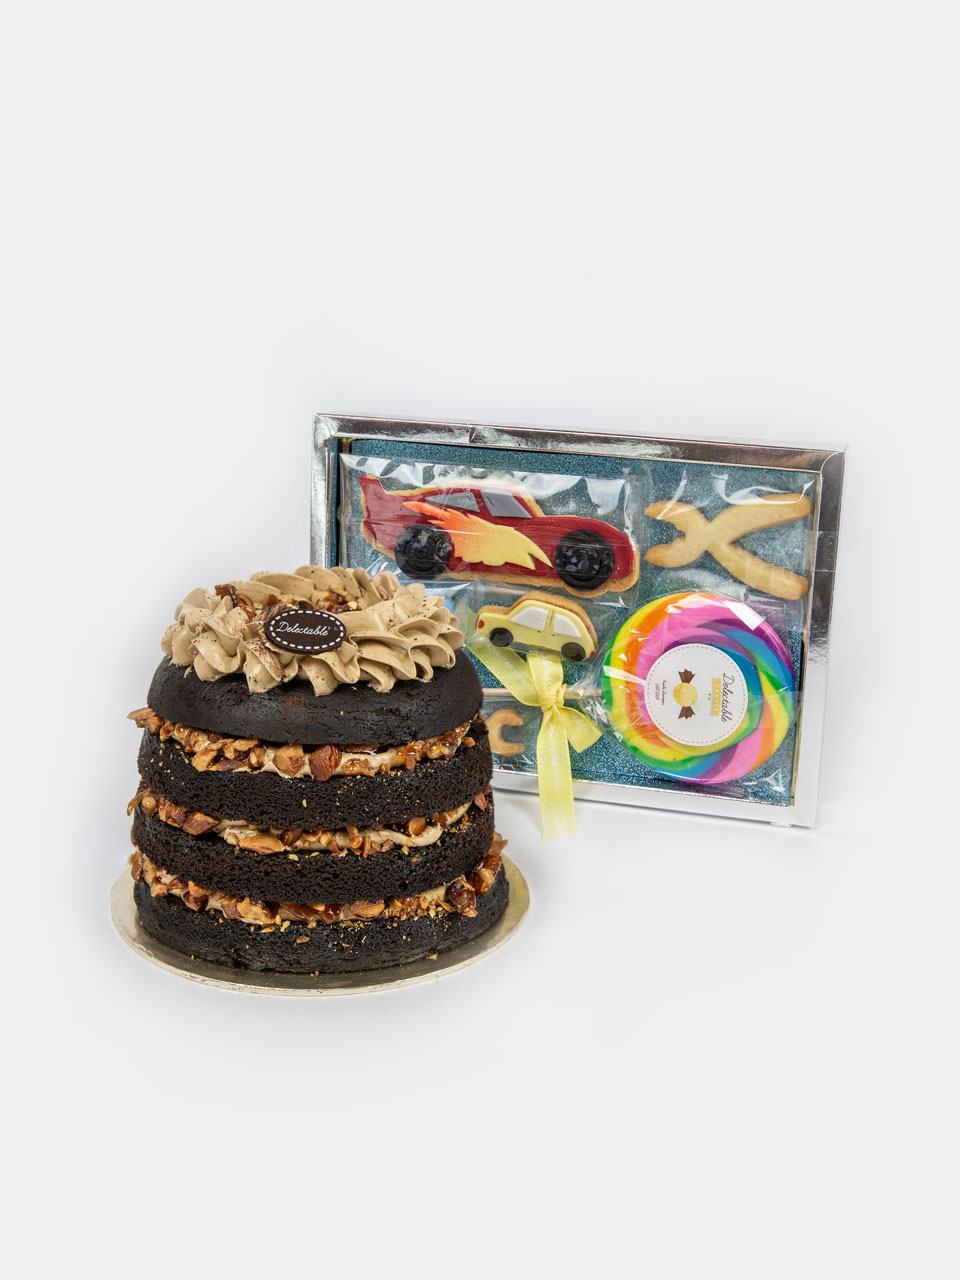 Delectable Kids Birthday Cake - Online birthday cake delivery Malaysia - Cars